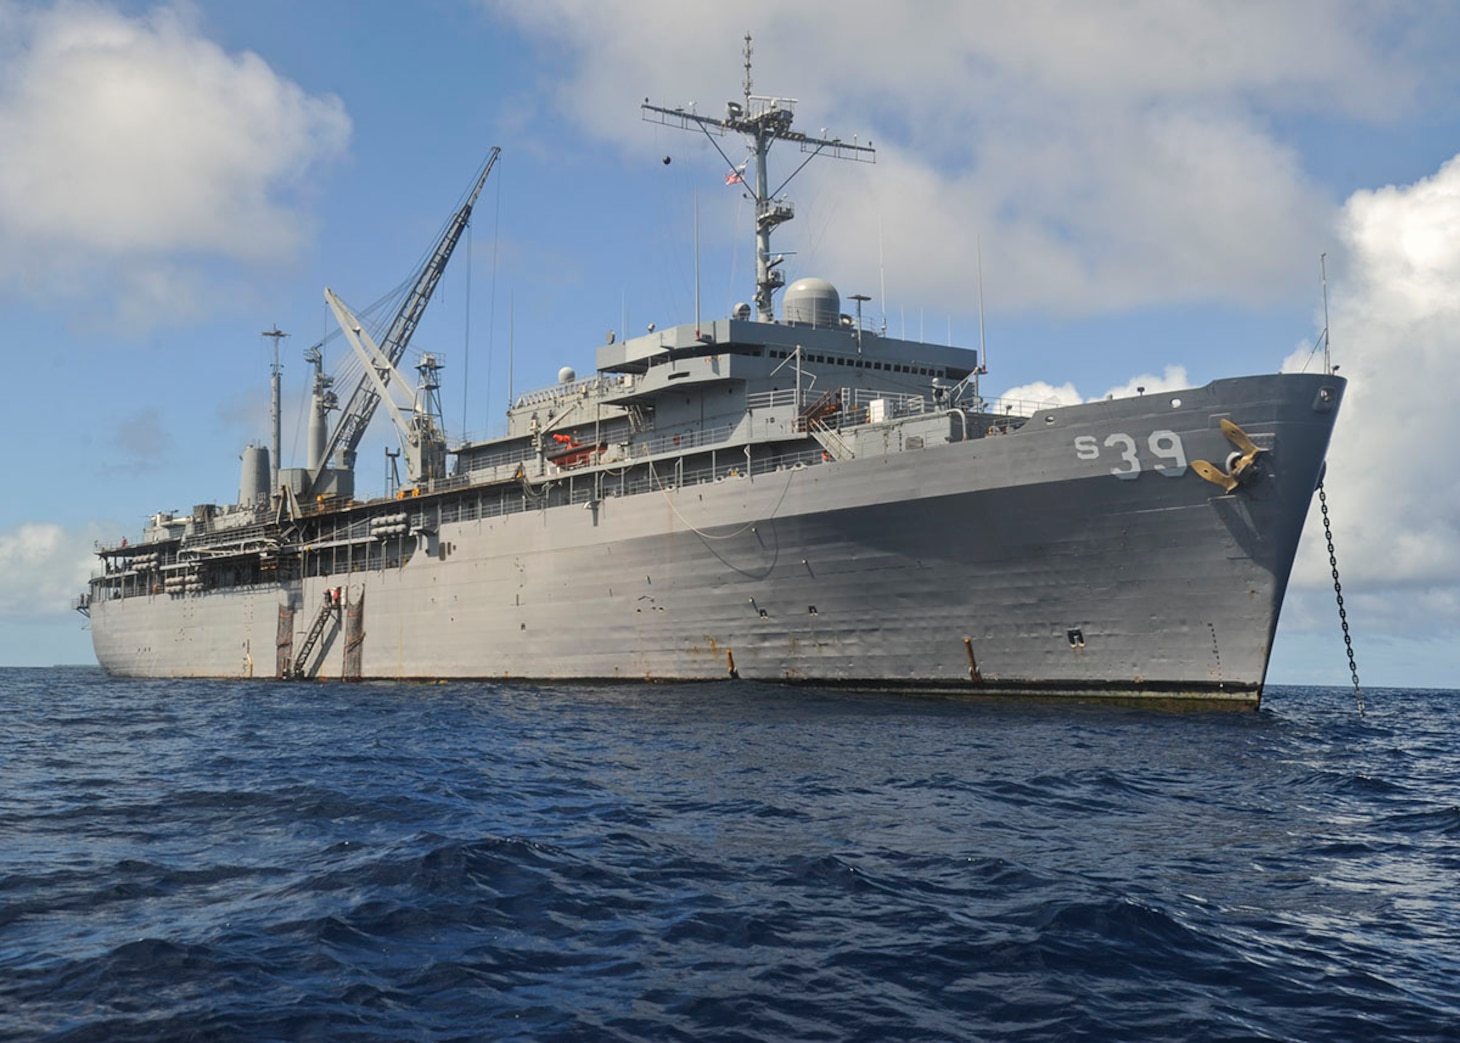 ULITHI, Yap (Dec. 7, 2019) – The submarine tender USS Emory S. Land (AS 39) sits anchored at Ulithi Atoll, Dec. 7. Land is deployed to the U.S. 7th Fleet area of operations to support theater security cooperation efforts in the Indo-Pacific region. (U.S. Navy photo by Mass Communication Specialist 2nd Class Richard A. Miller/Released)